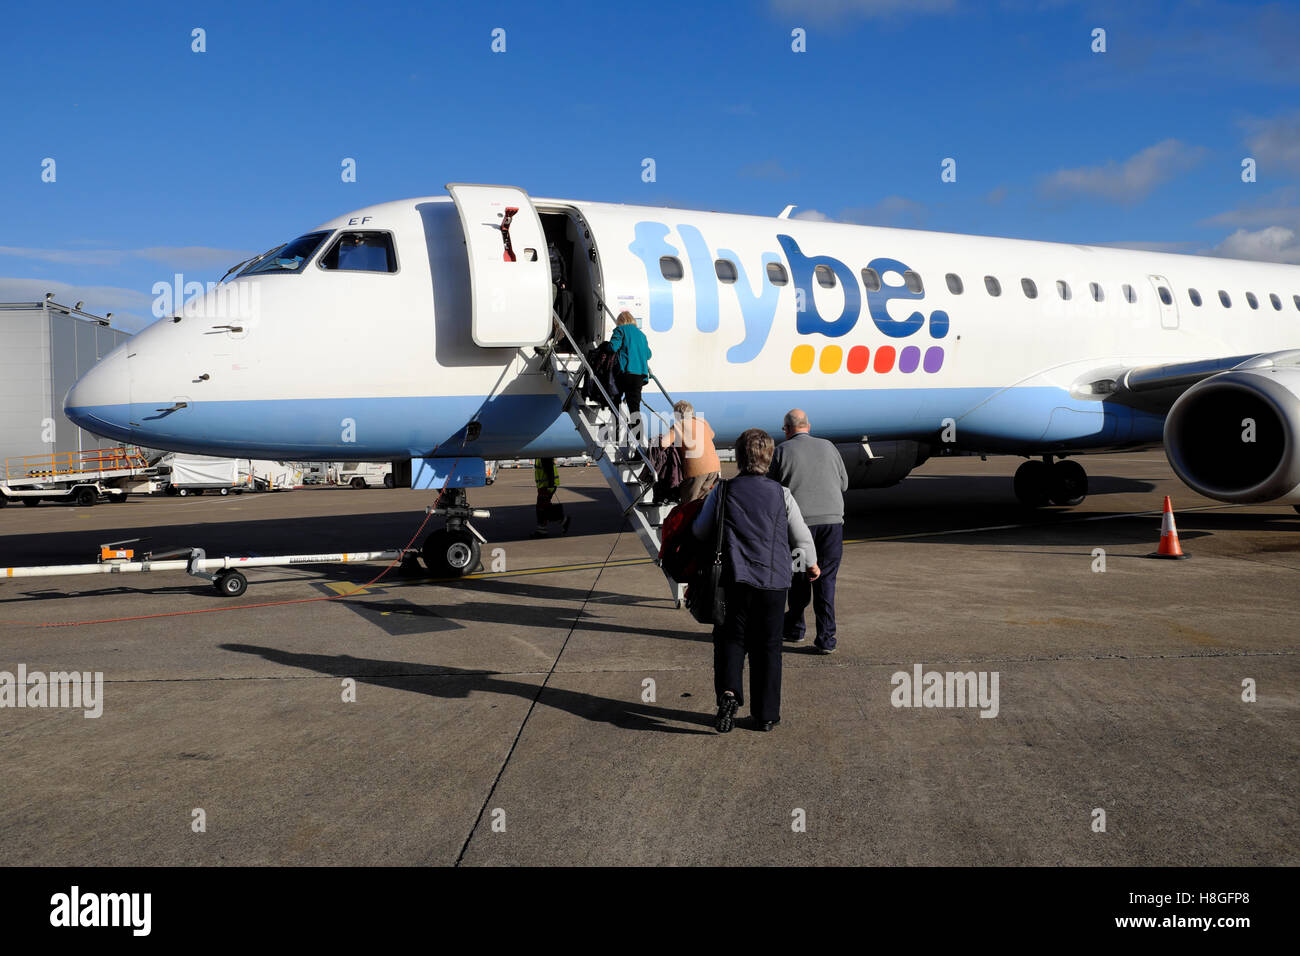 Flybe passengers boarding a plane on the tarmac at Cardiff Airport,  Wales UK  KATHY DEWITT Stock Photo